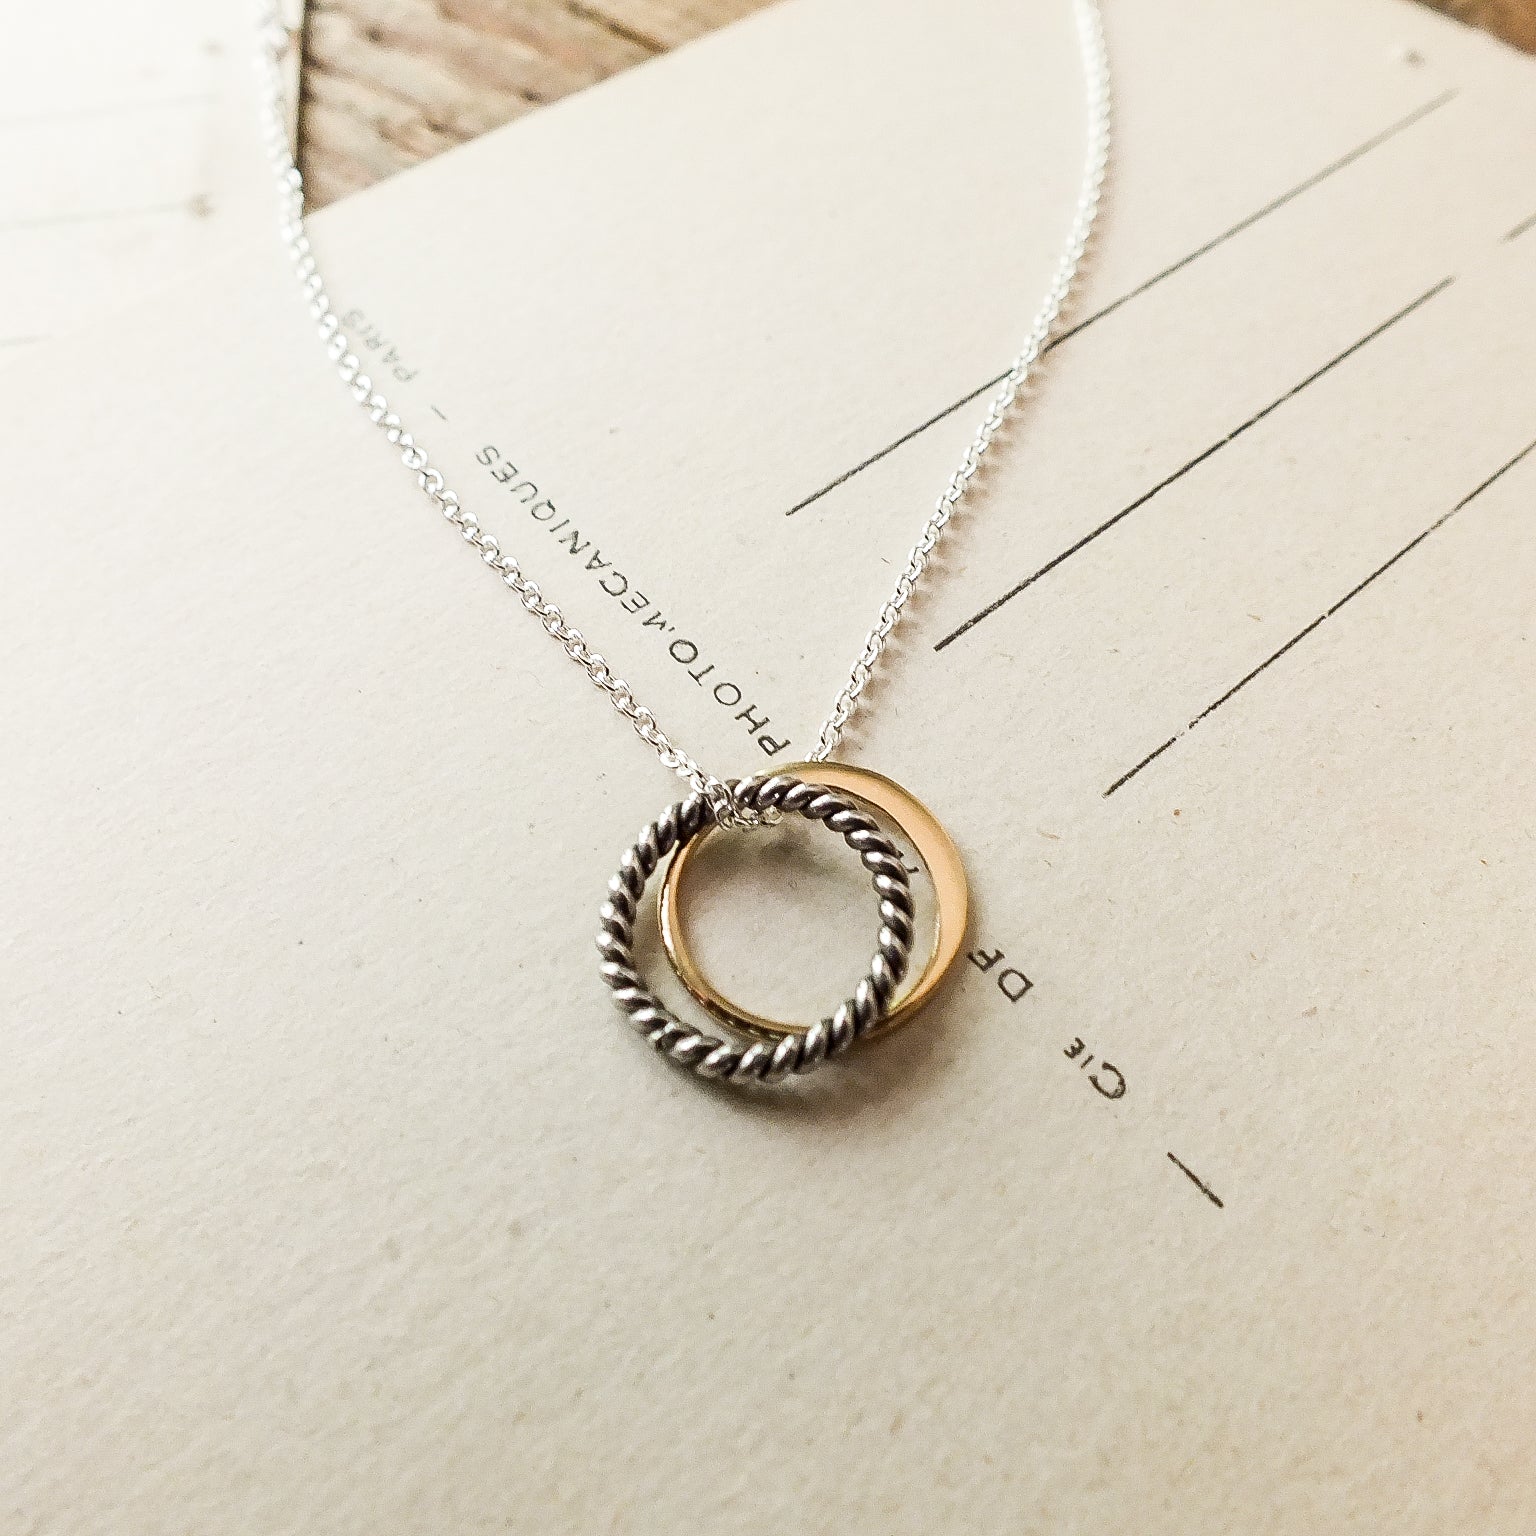 Becoming Jewelry True Friends Necklace with a twisted ring pendant on a piece of paper.